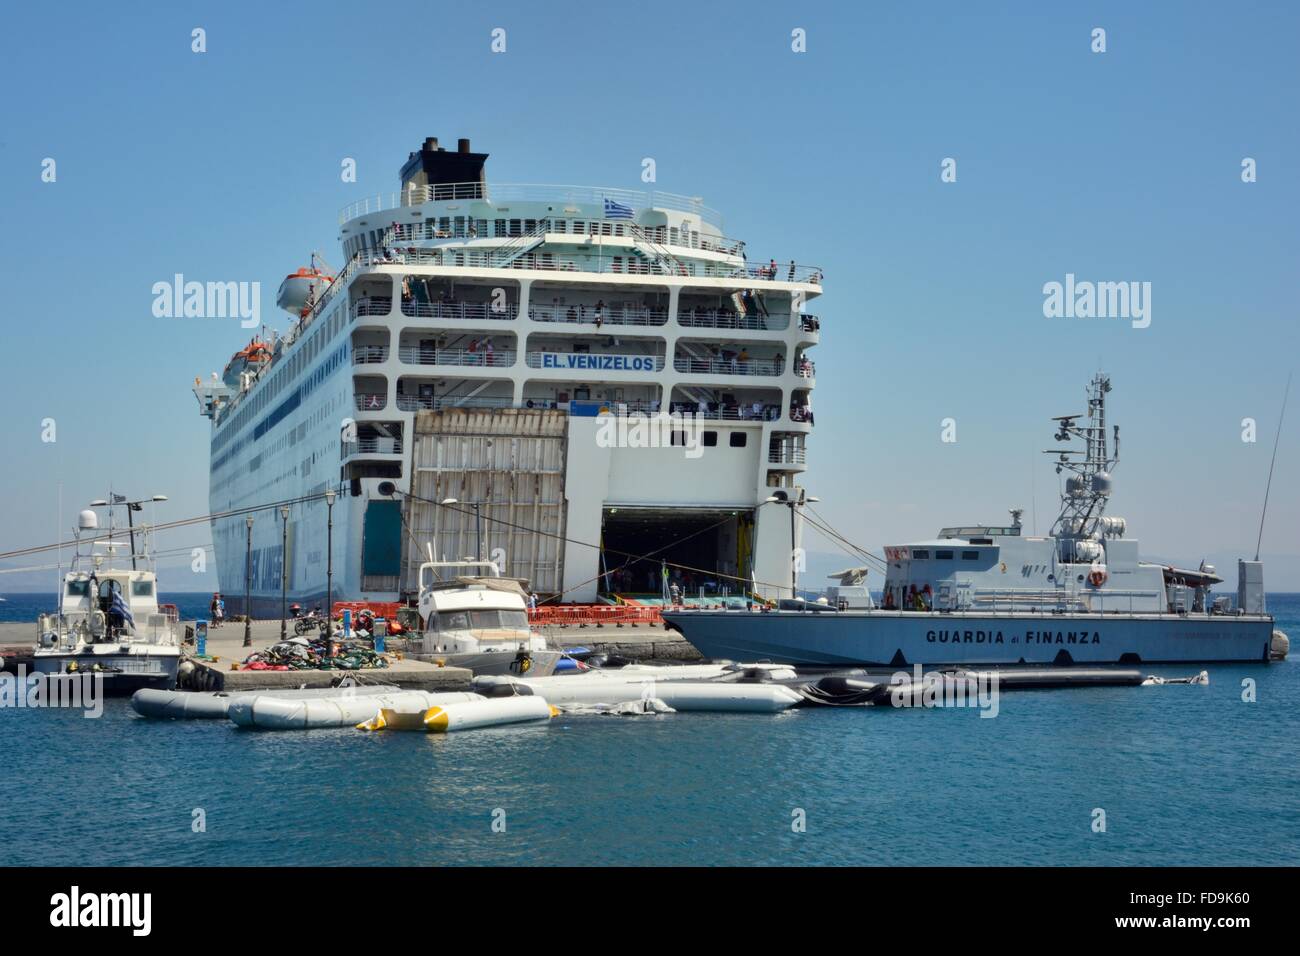 Ferry El Venizelos in Kos harbour loaded with migrants for passage to Athens, with many dinghies used for crossing from Turkey. Stock Photo